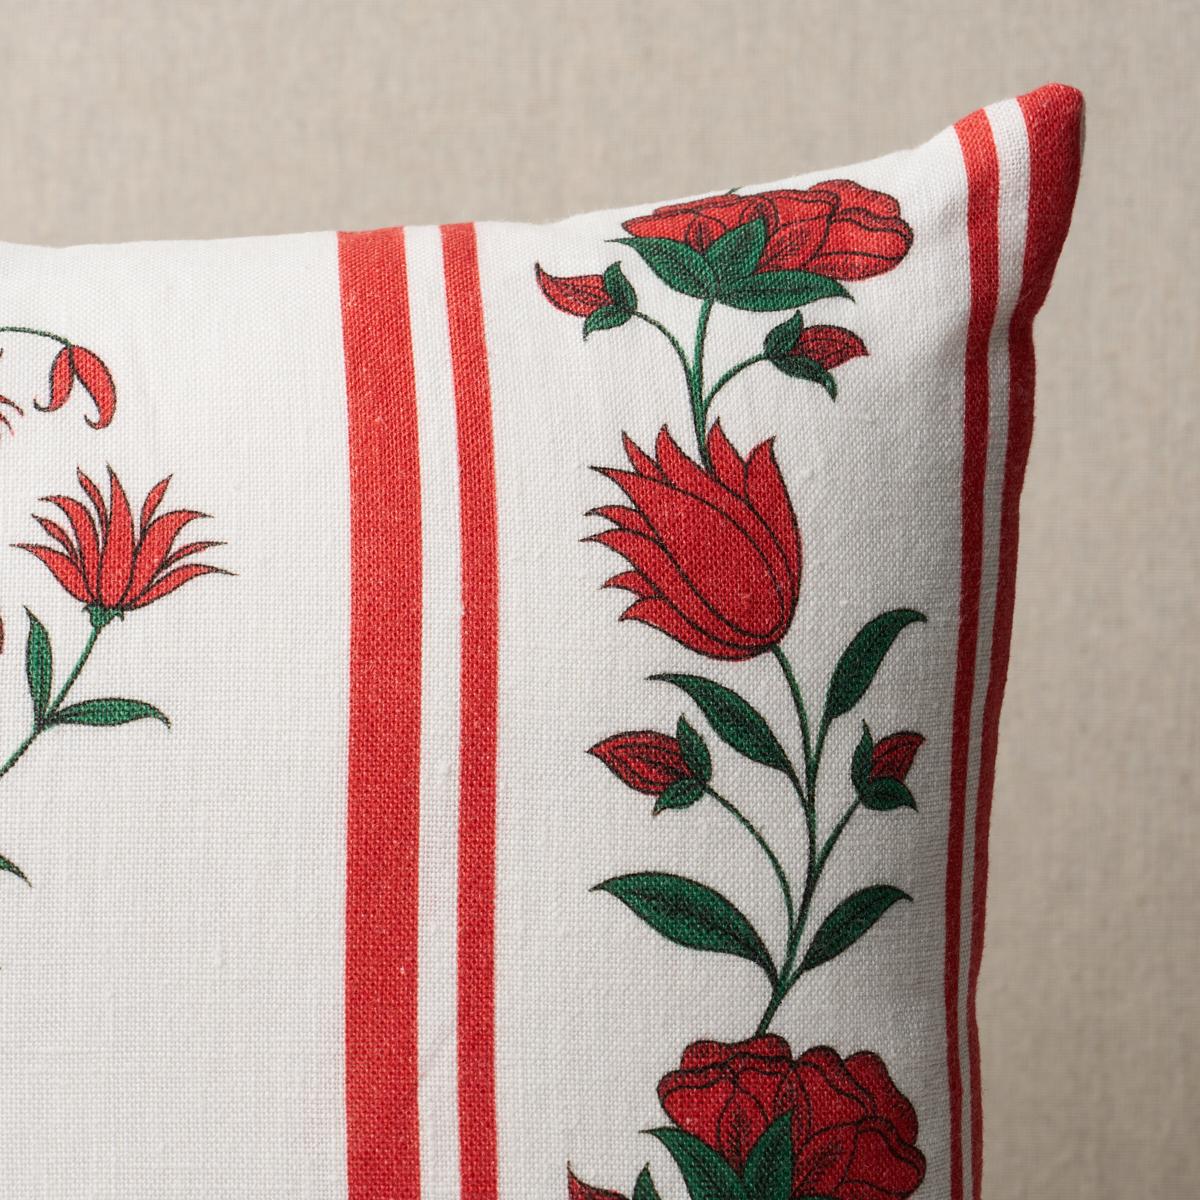 This pillow features Royal Poppy Stripe by Marie-Anne Oudejans for Schumacher with a knife edge finish. Inspired by Dutch simplicity and traditional Indian flower motifs, Jaipur, India–based decorative painter Marie-Anne Oudejans created Royal Poppy